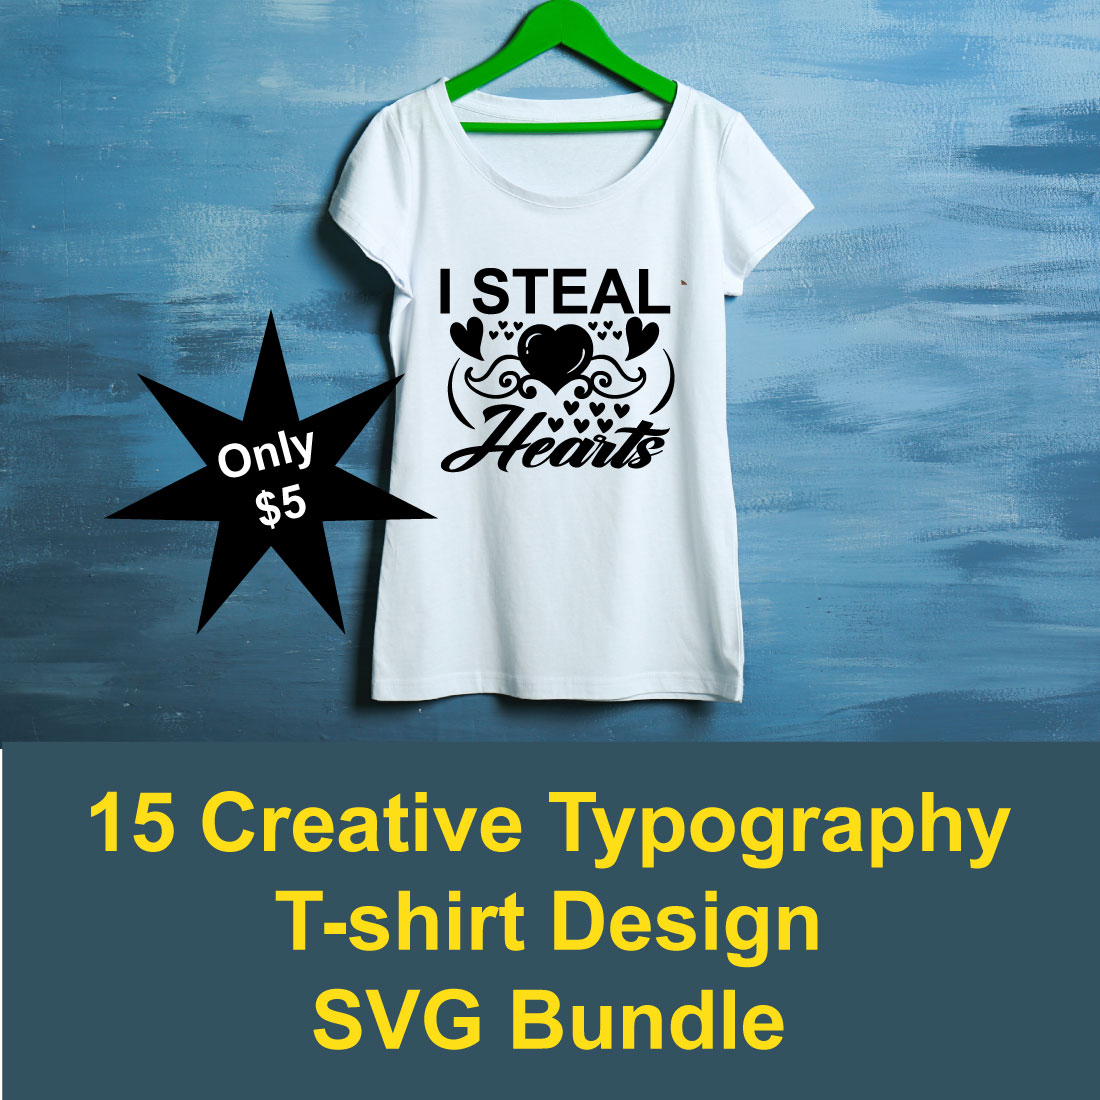 T-shirt Typography Design Quotes SVG cover image.